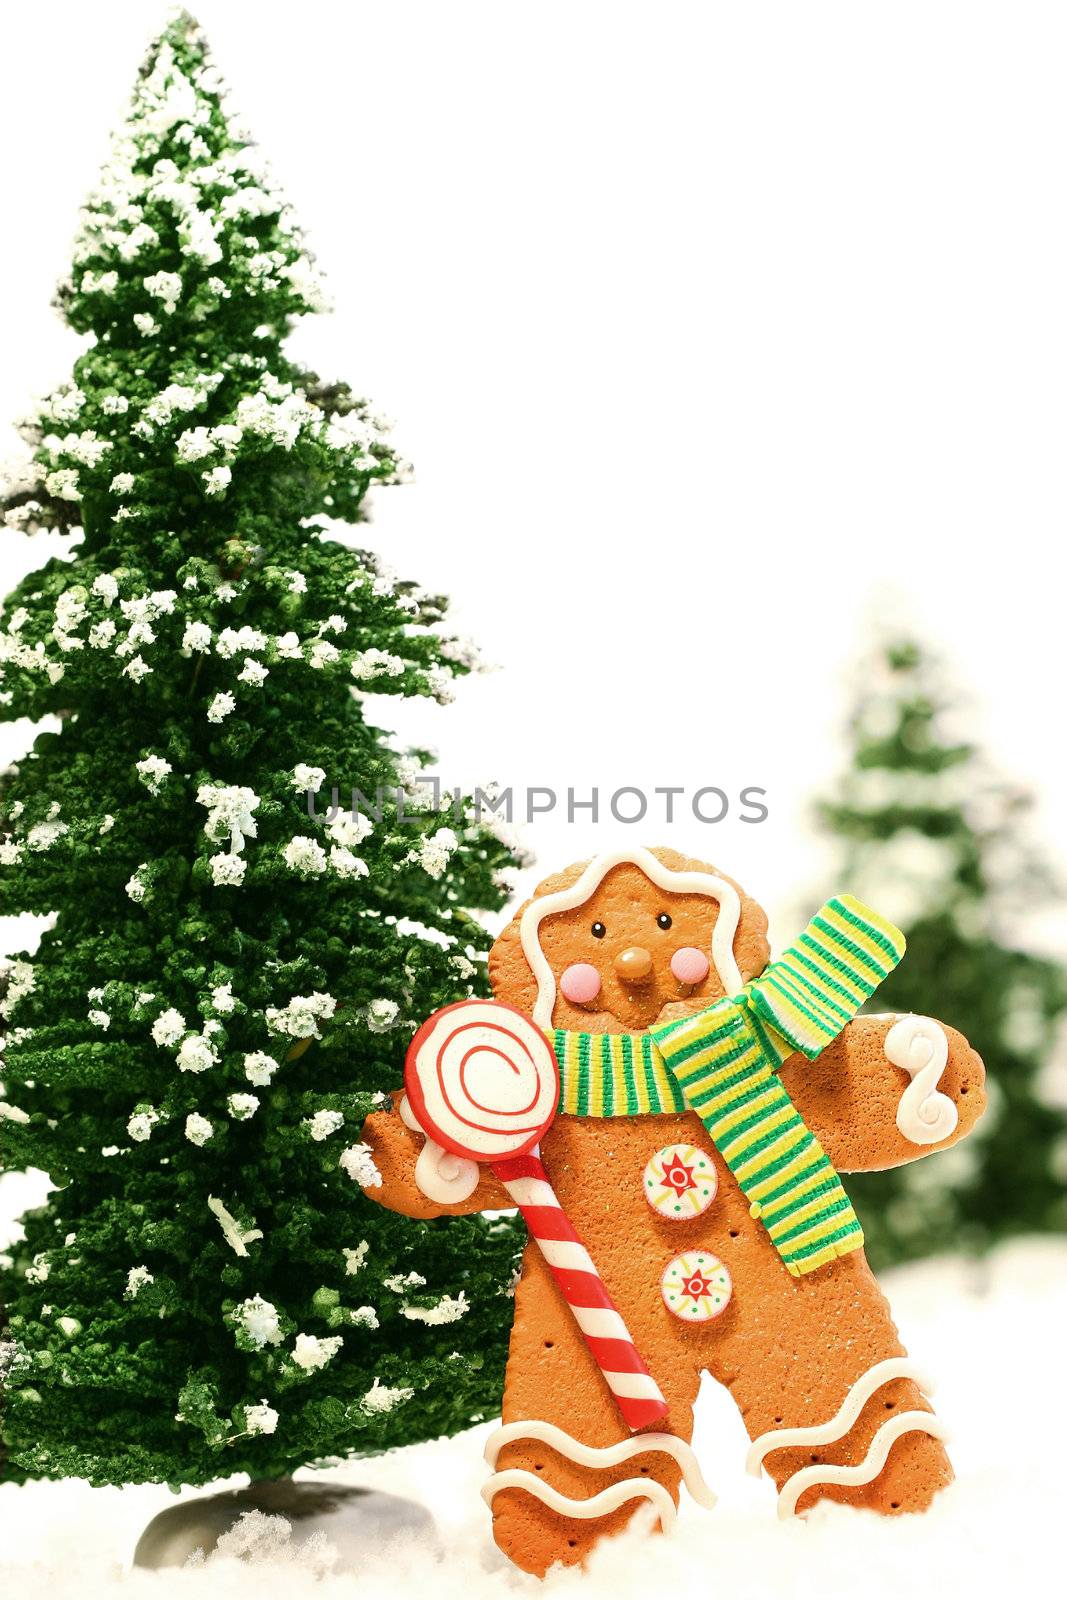 Little gingerbread man with trees  by Sandralise